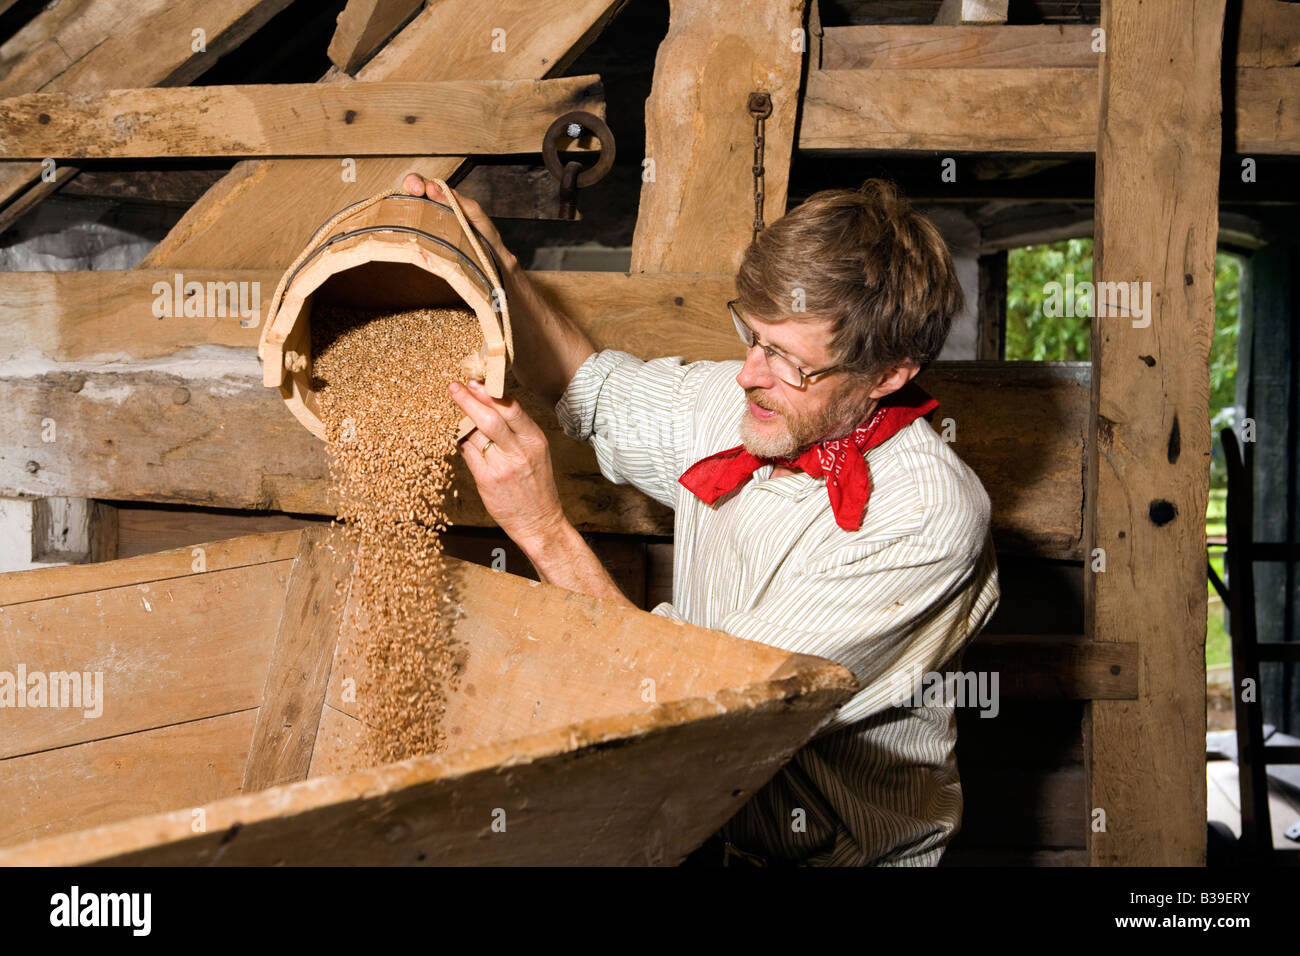 UK Cheshire Stretton medieval mill interior miller pouring grain into hopper for grinding Stock Photo